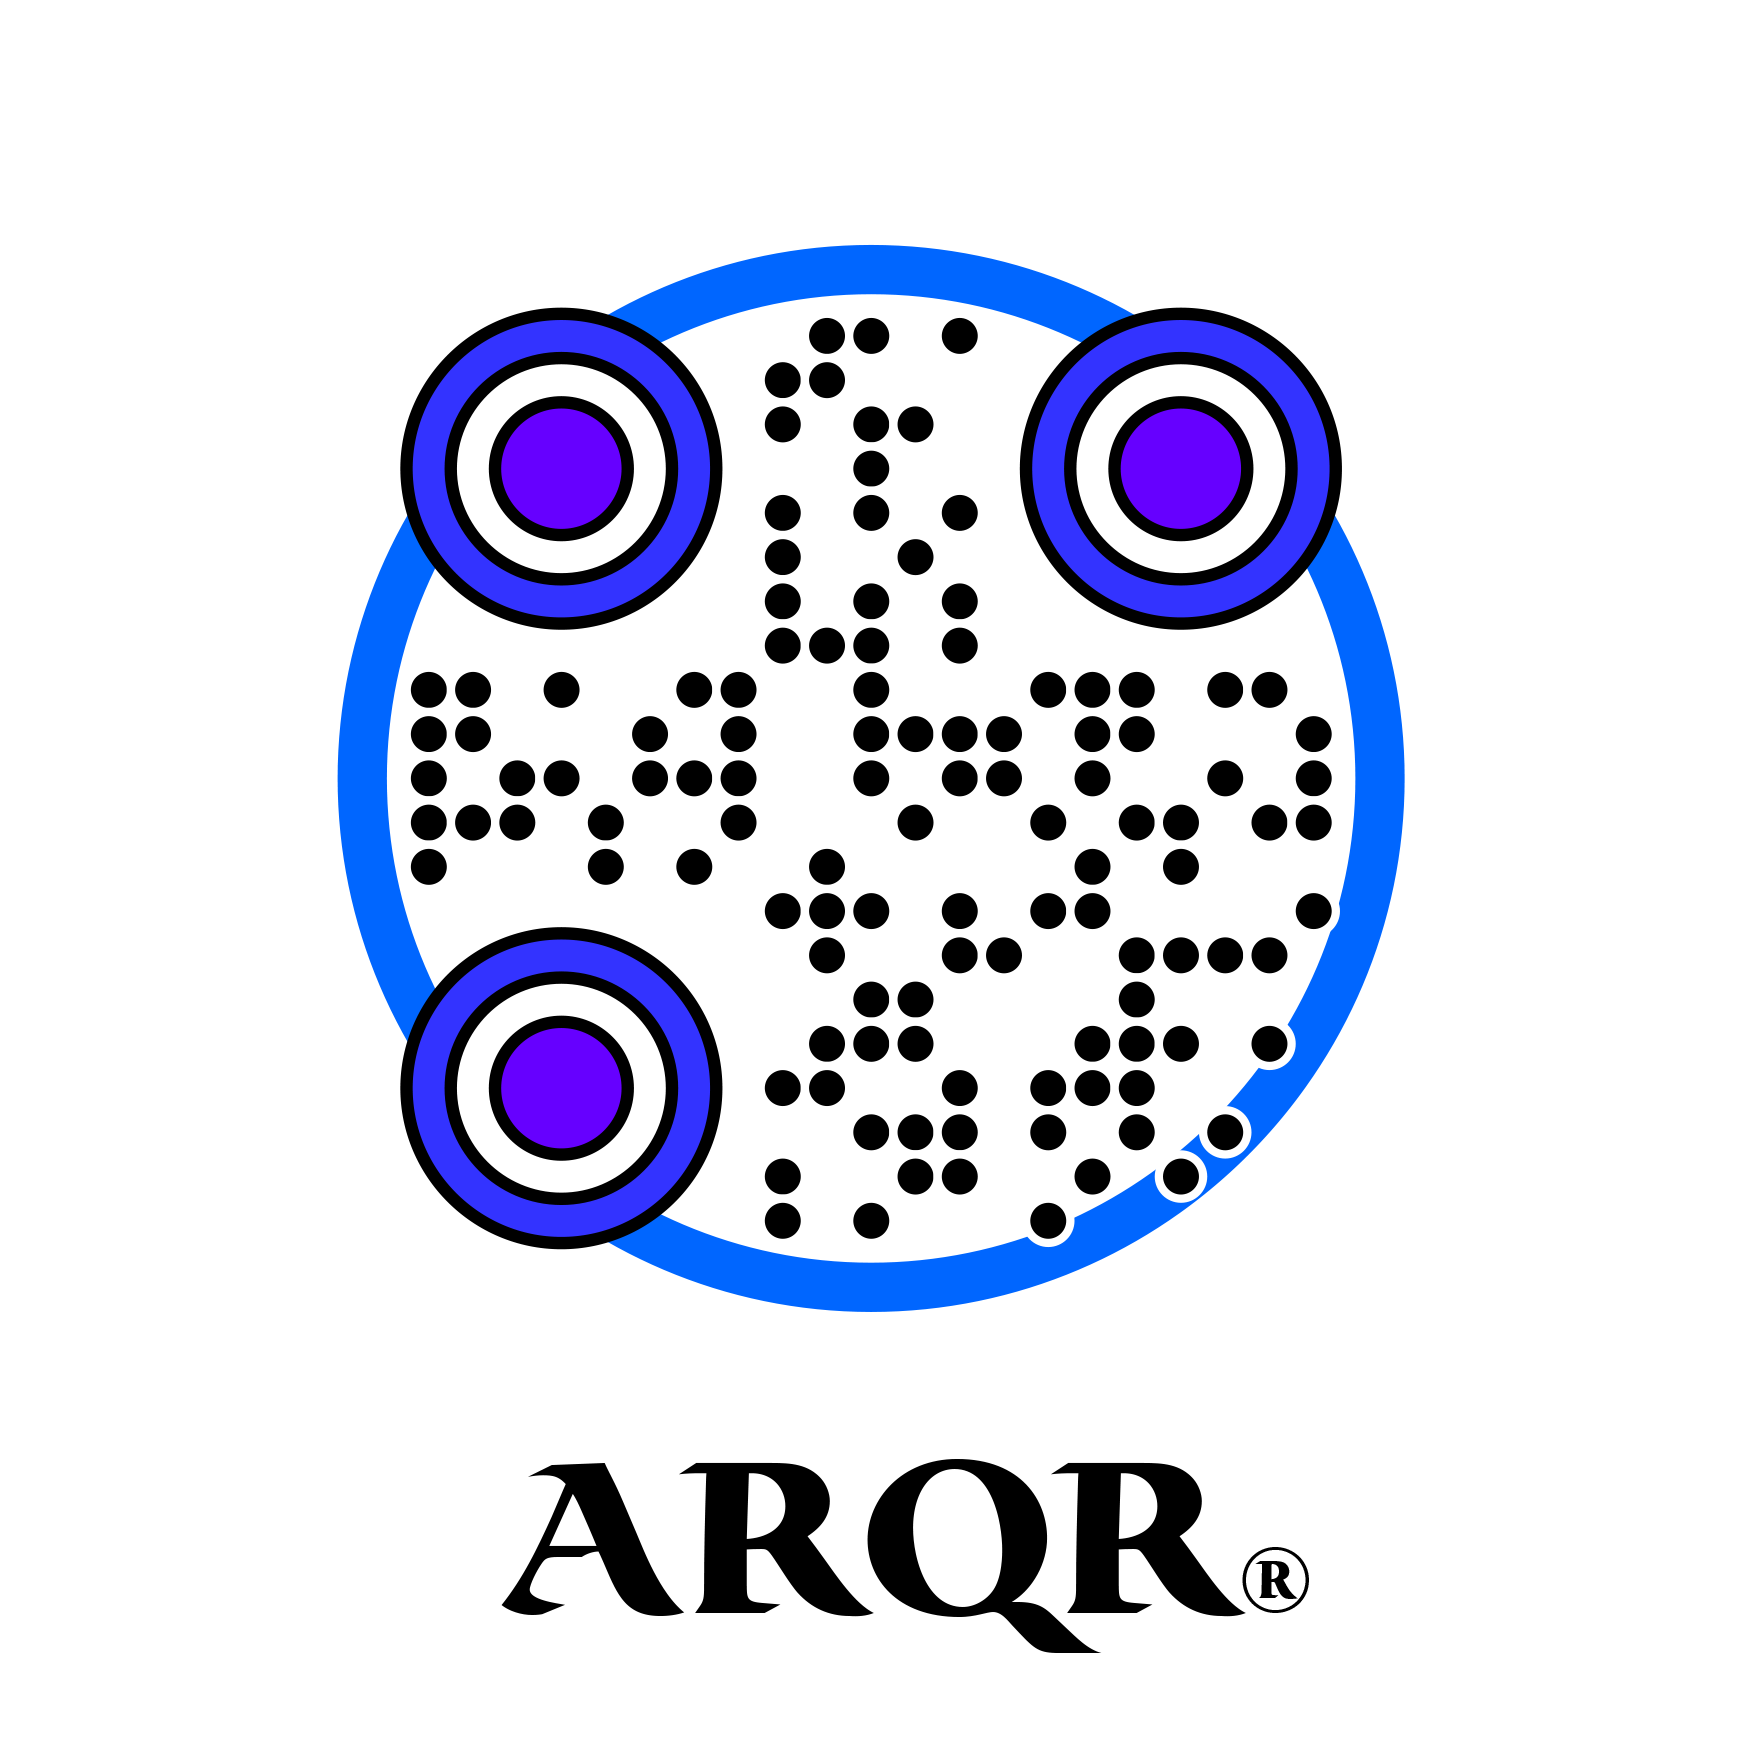 ARQR Code for Foo Fighters YouTube music videos.